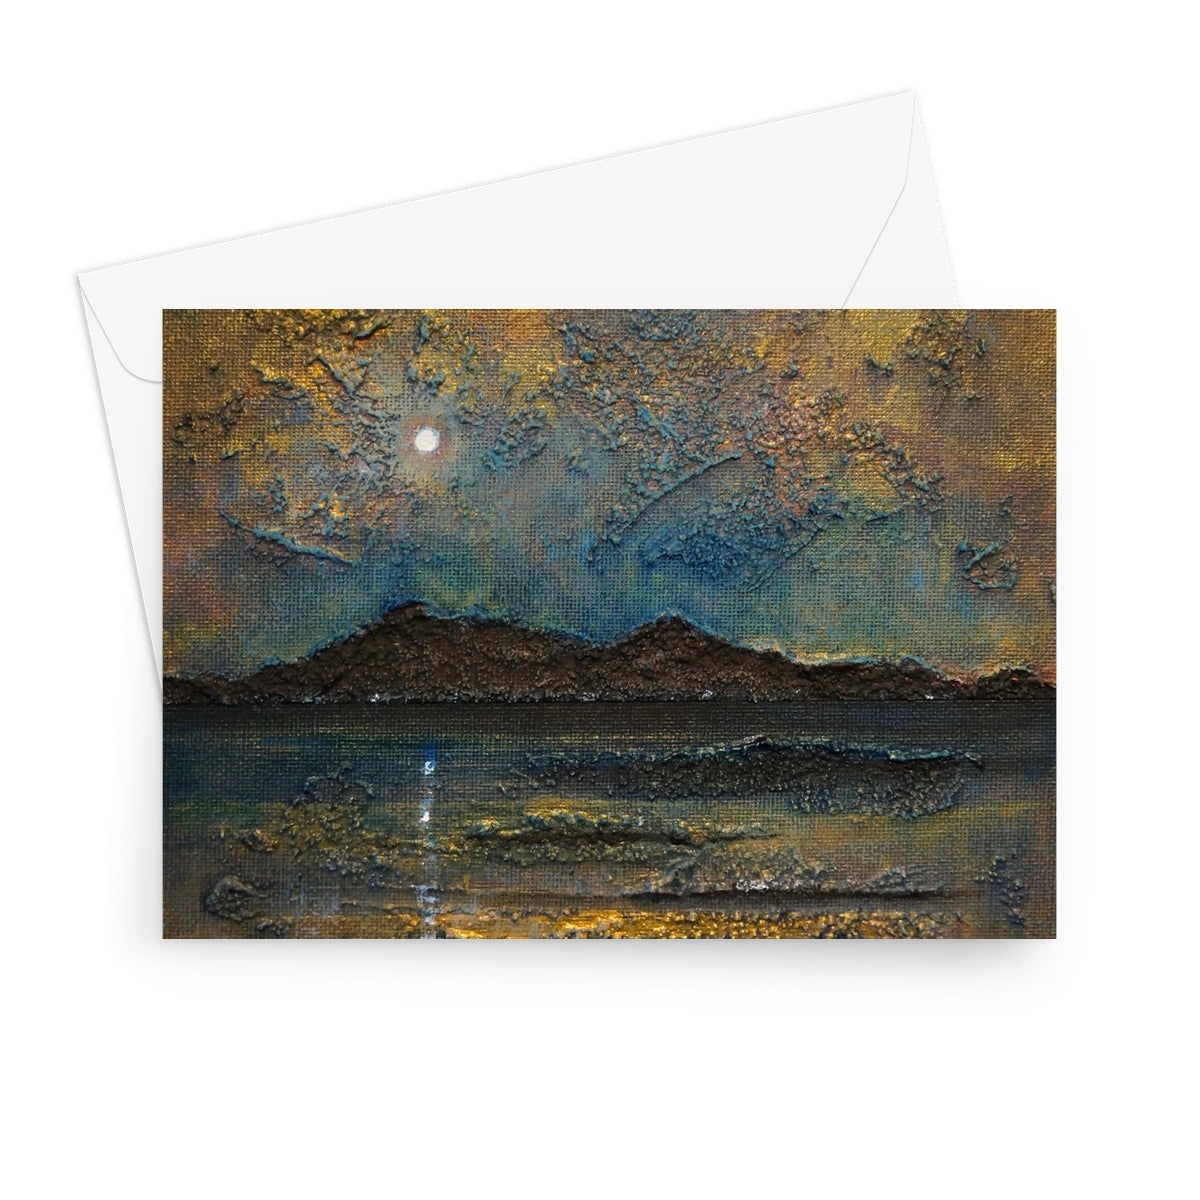 Arran Moonlight Art Gifts Greeting Card-Greetings Cards-Arran Art Gallery-7"x5"-10 Cards-Paintings, Prints, Homeware, Art Gifts From Scotland By Scottish Artist Kevin Hunter